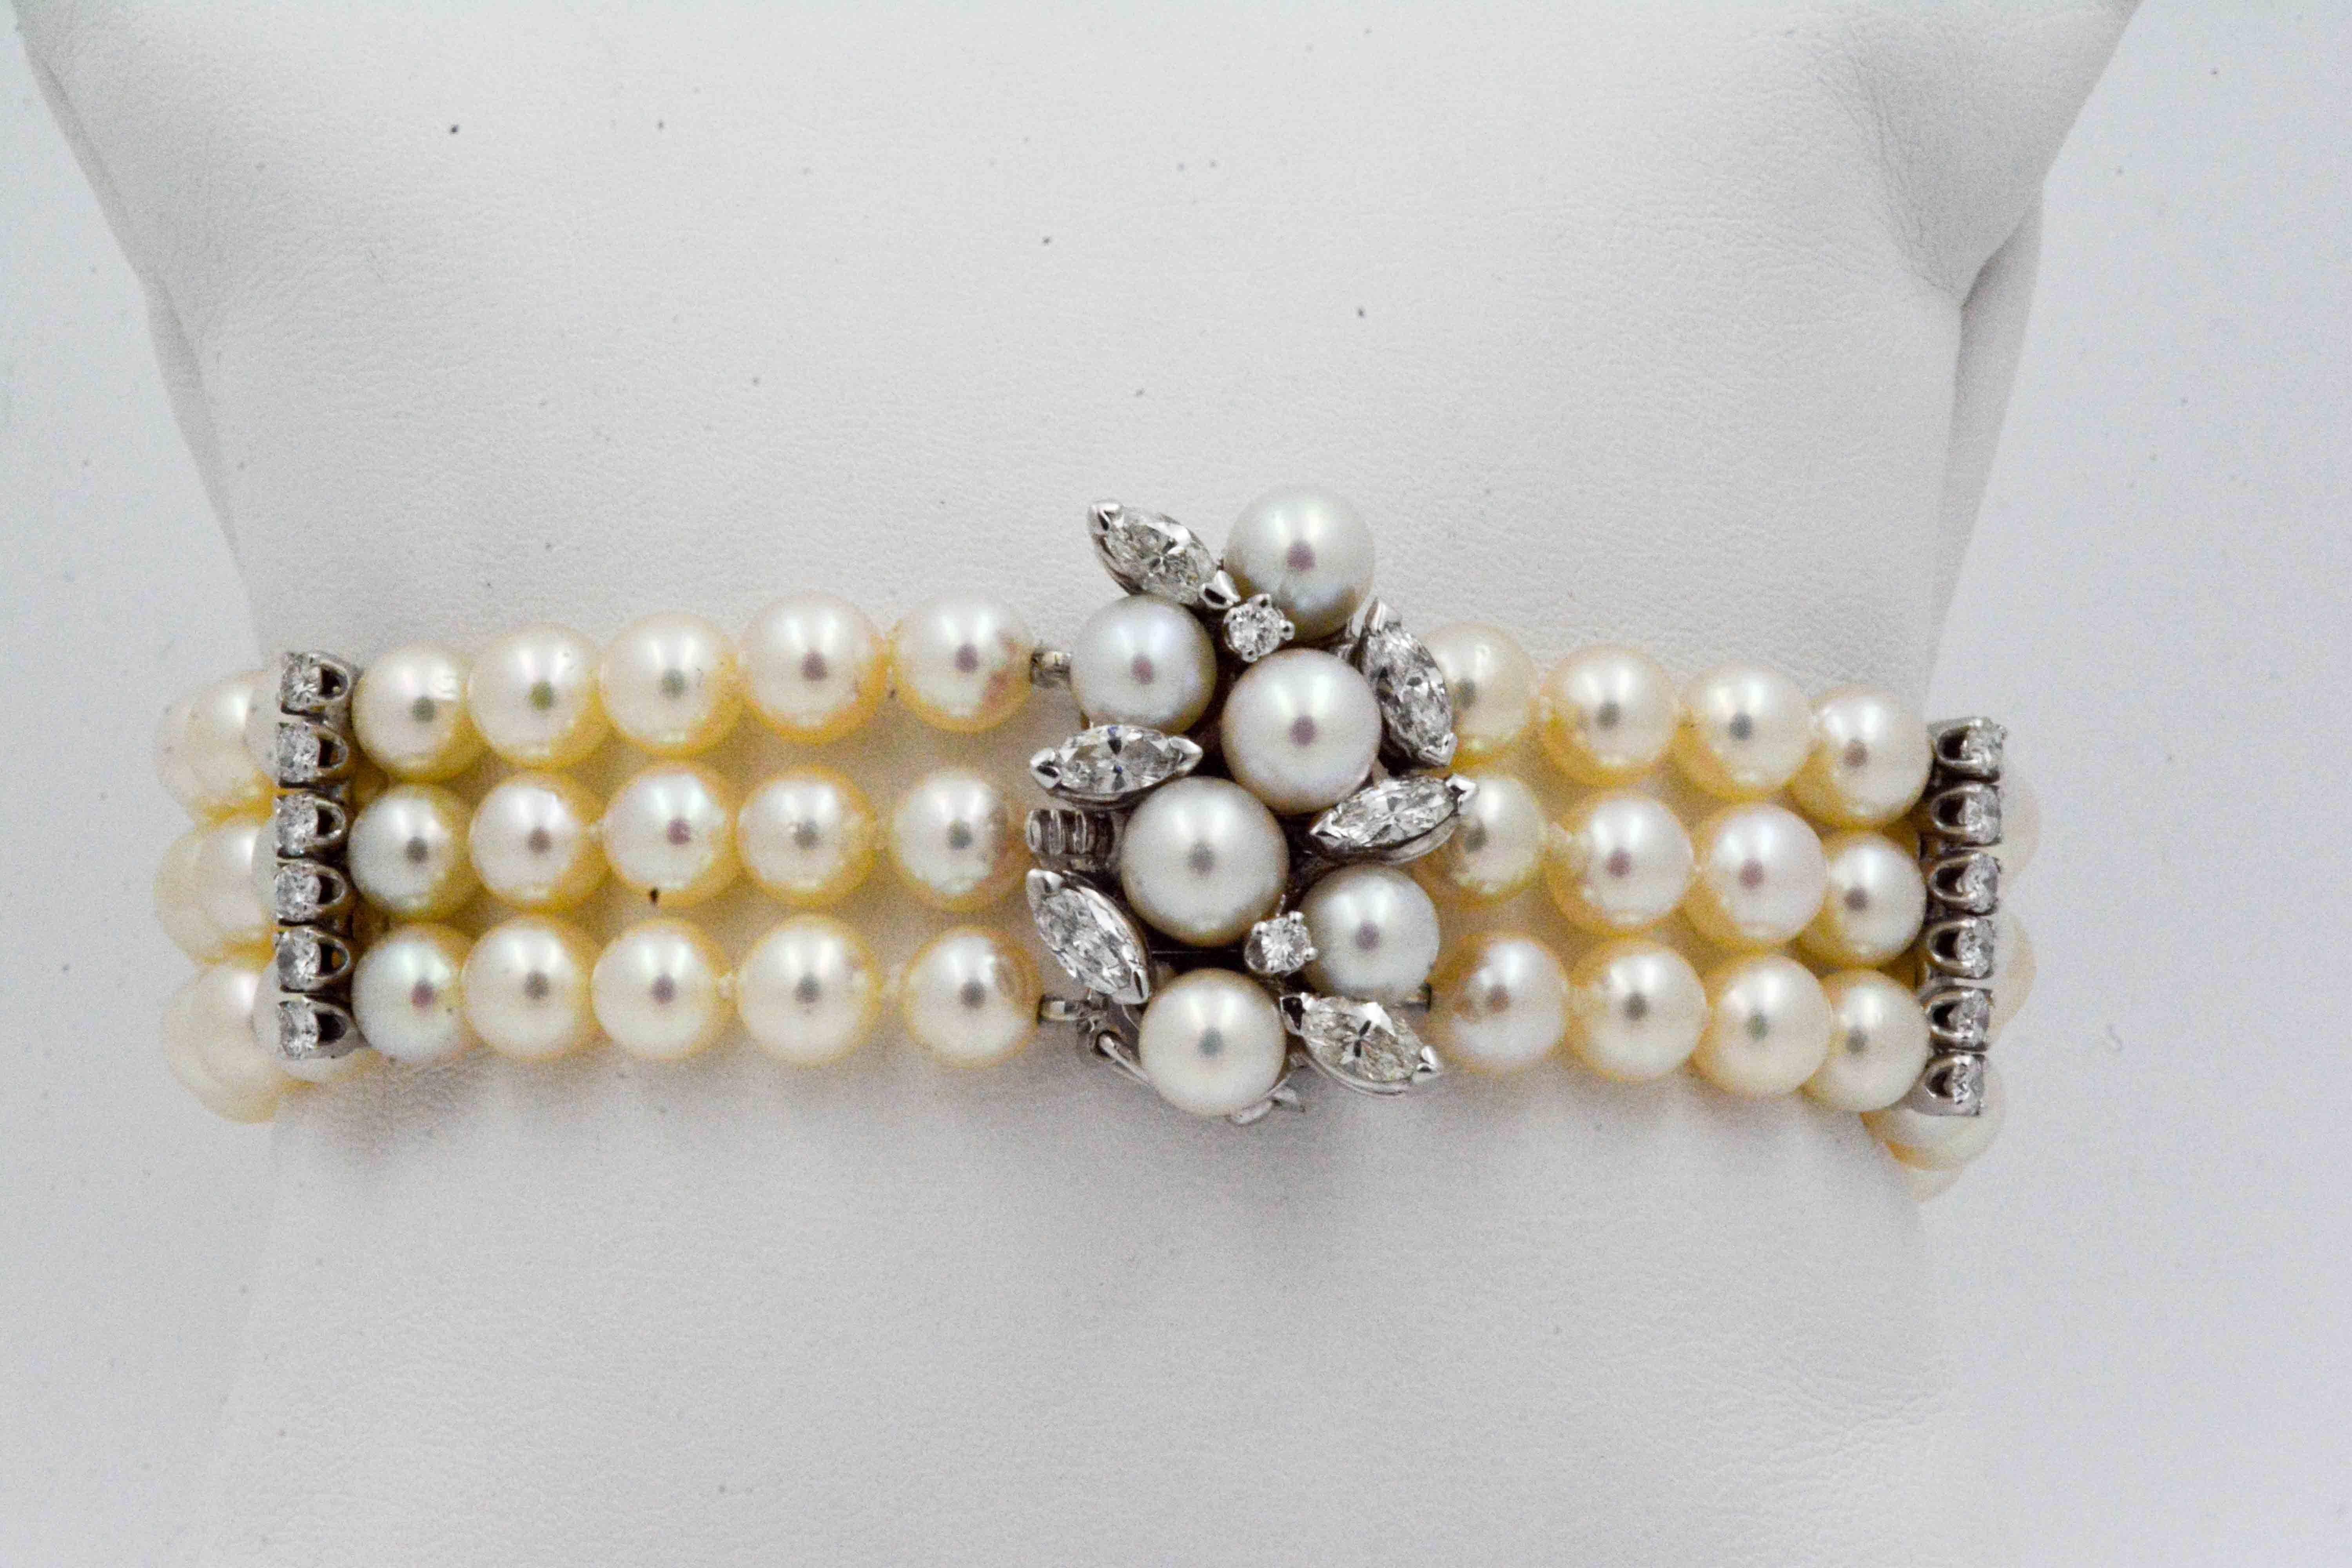 Head and shoulders above other bracelets, this regal 3 strand pearl bracelet has diamond accents set in 14 karat white gold. 90 amazing pearls measuring 5.5 - 6 mm.  are perfectly divided with 38 round brilliant cut diamonds (3.17 ctw, H-I color, SI